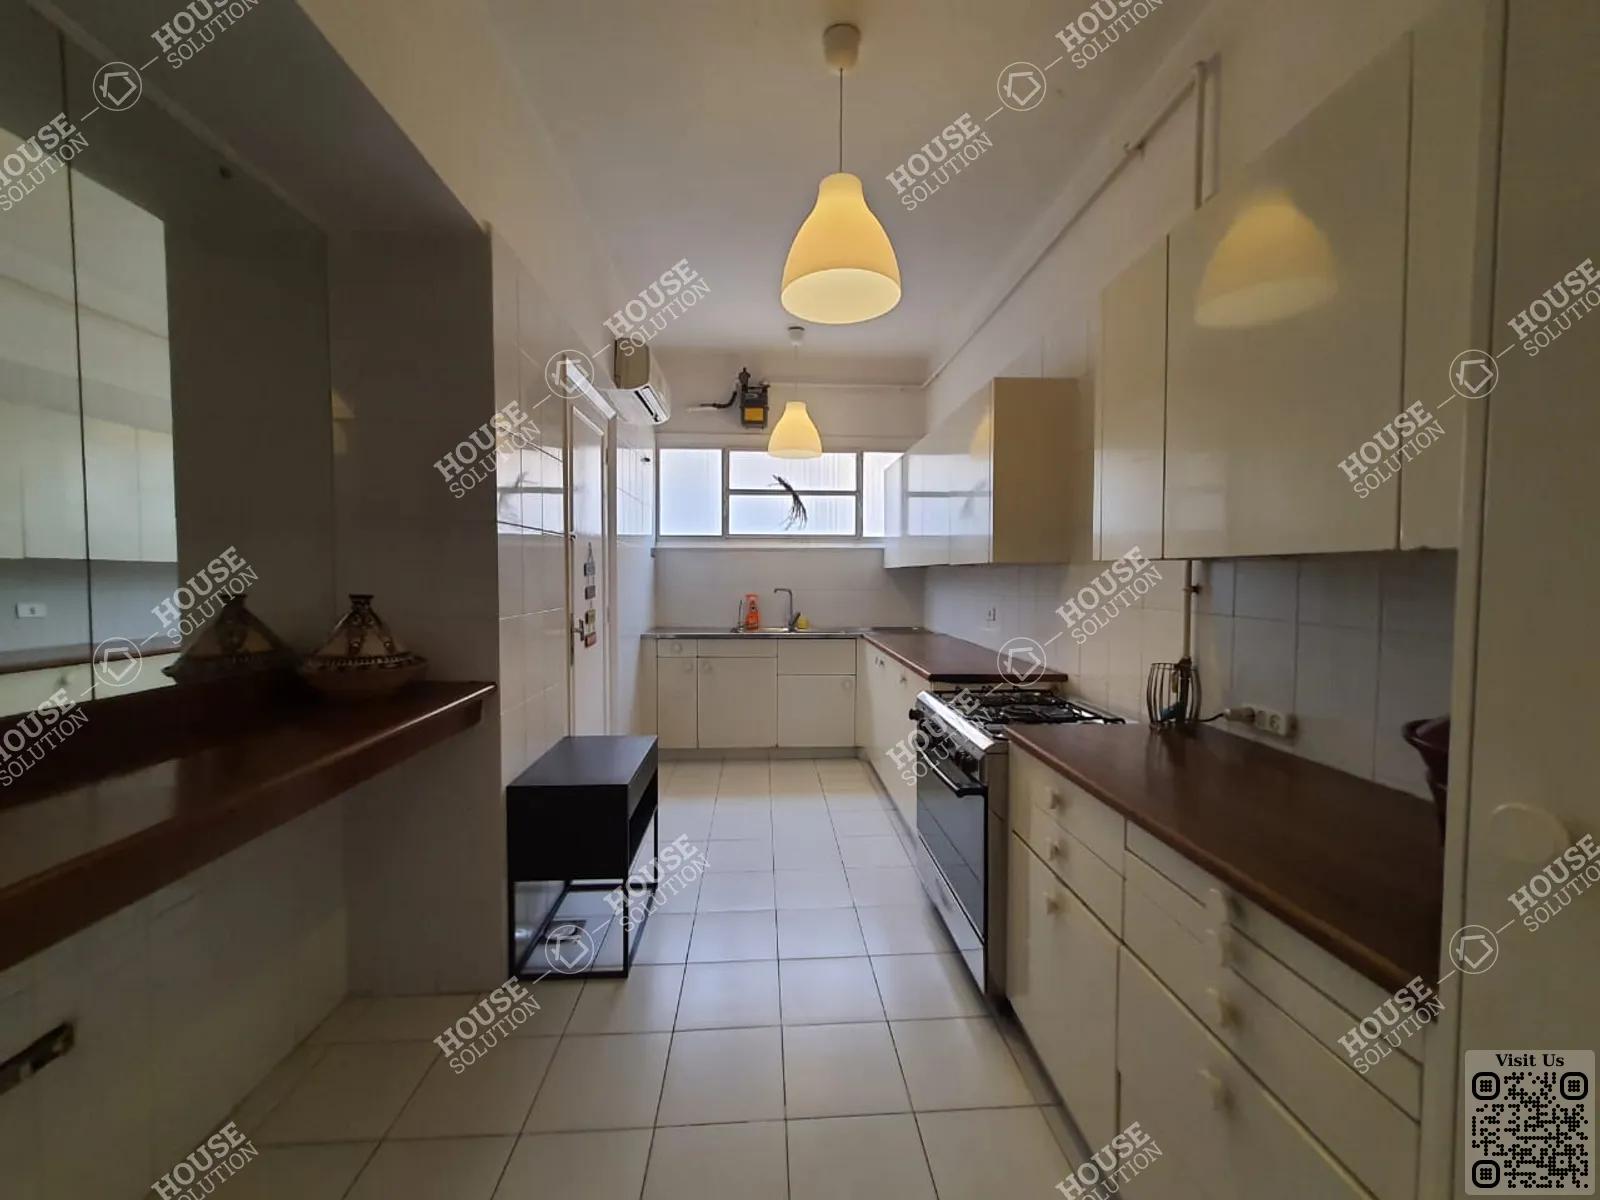 KITCHEN  @ Apartments For Rent In Maadi Maadi Sarayat Area: 180 m² consists of 3 Bedrooms 2 Bathrooms Modern furnished 5 stars #3806-1